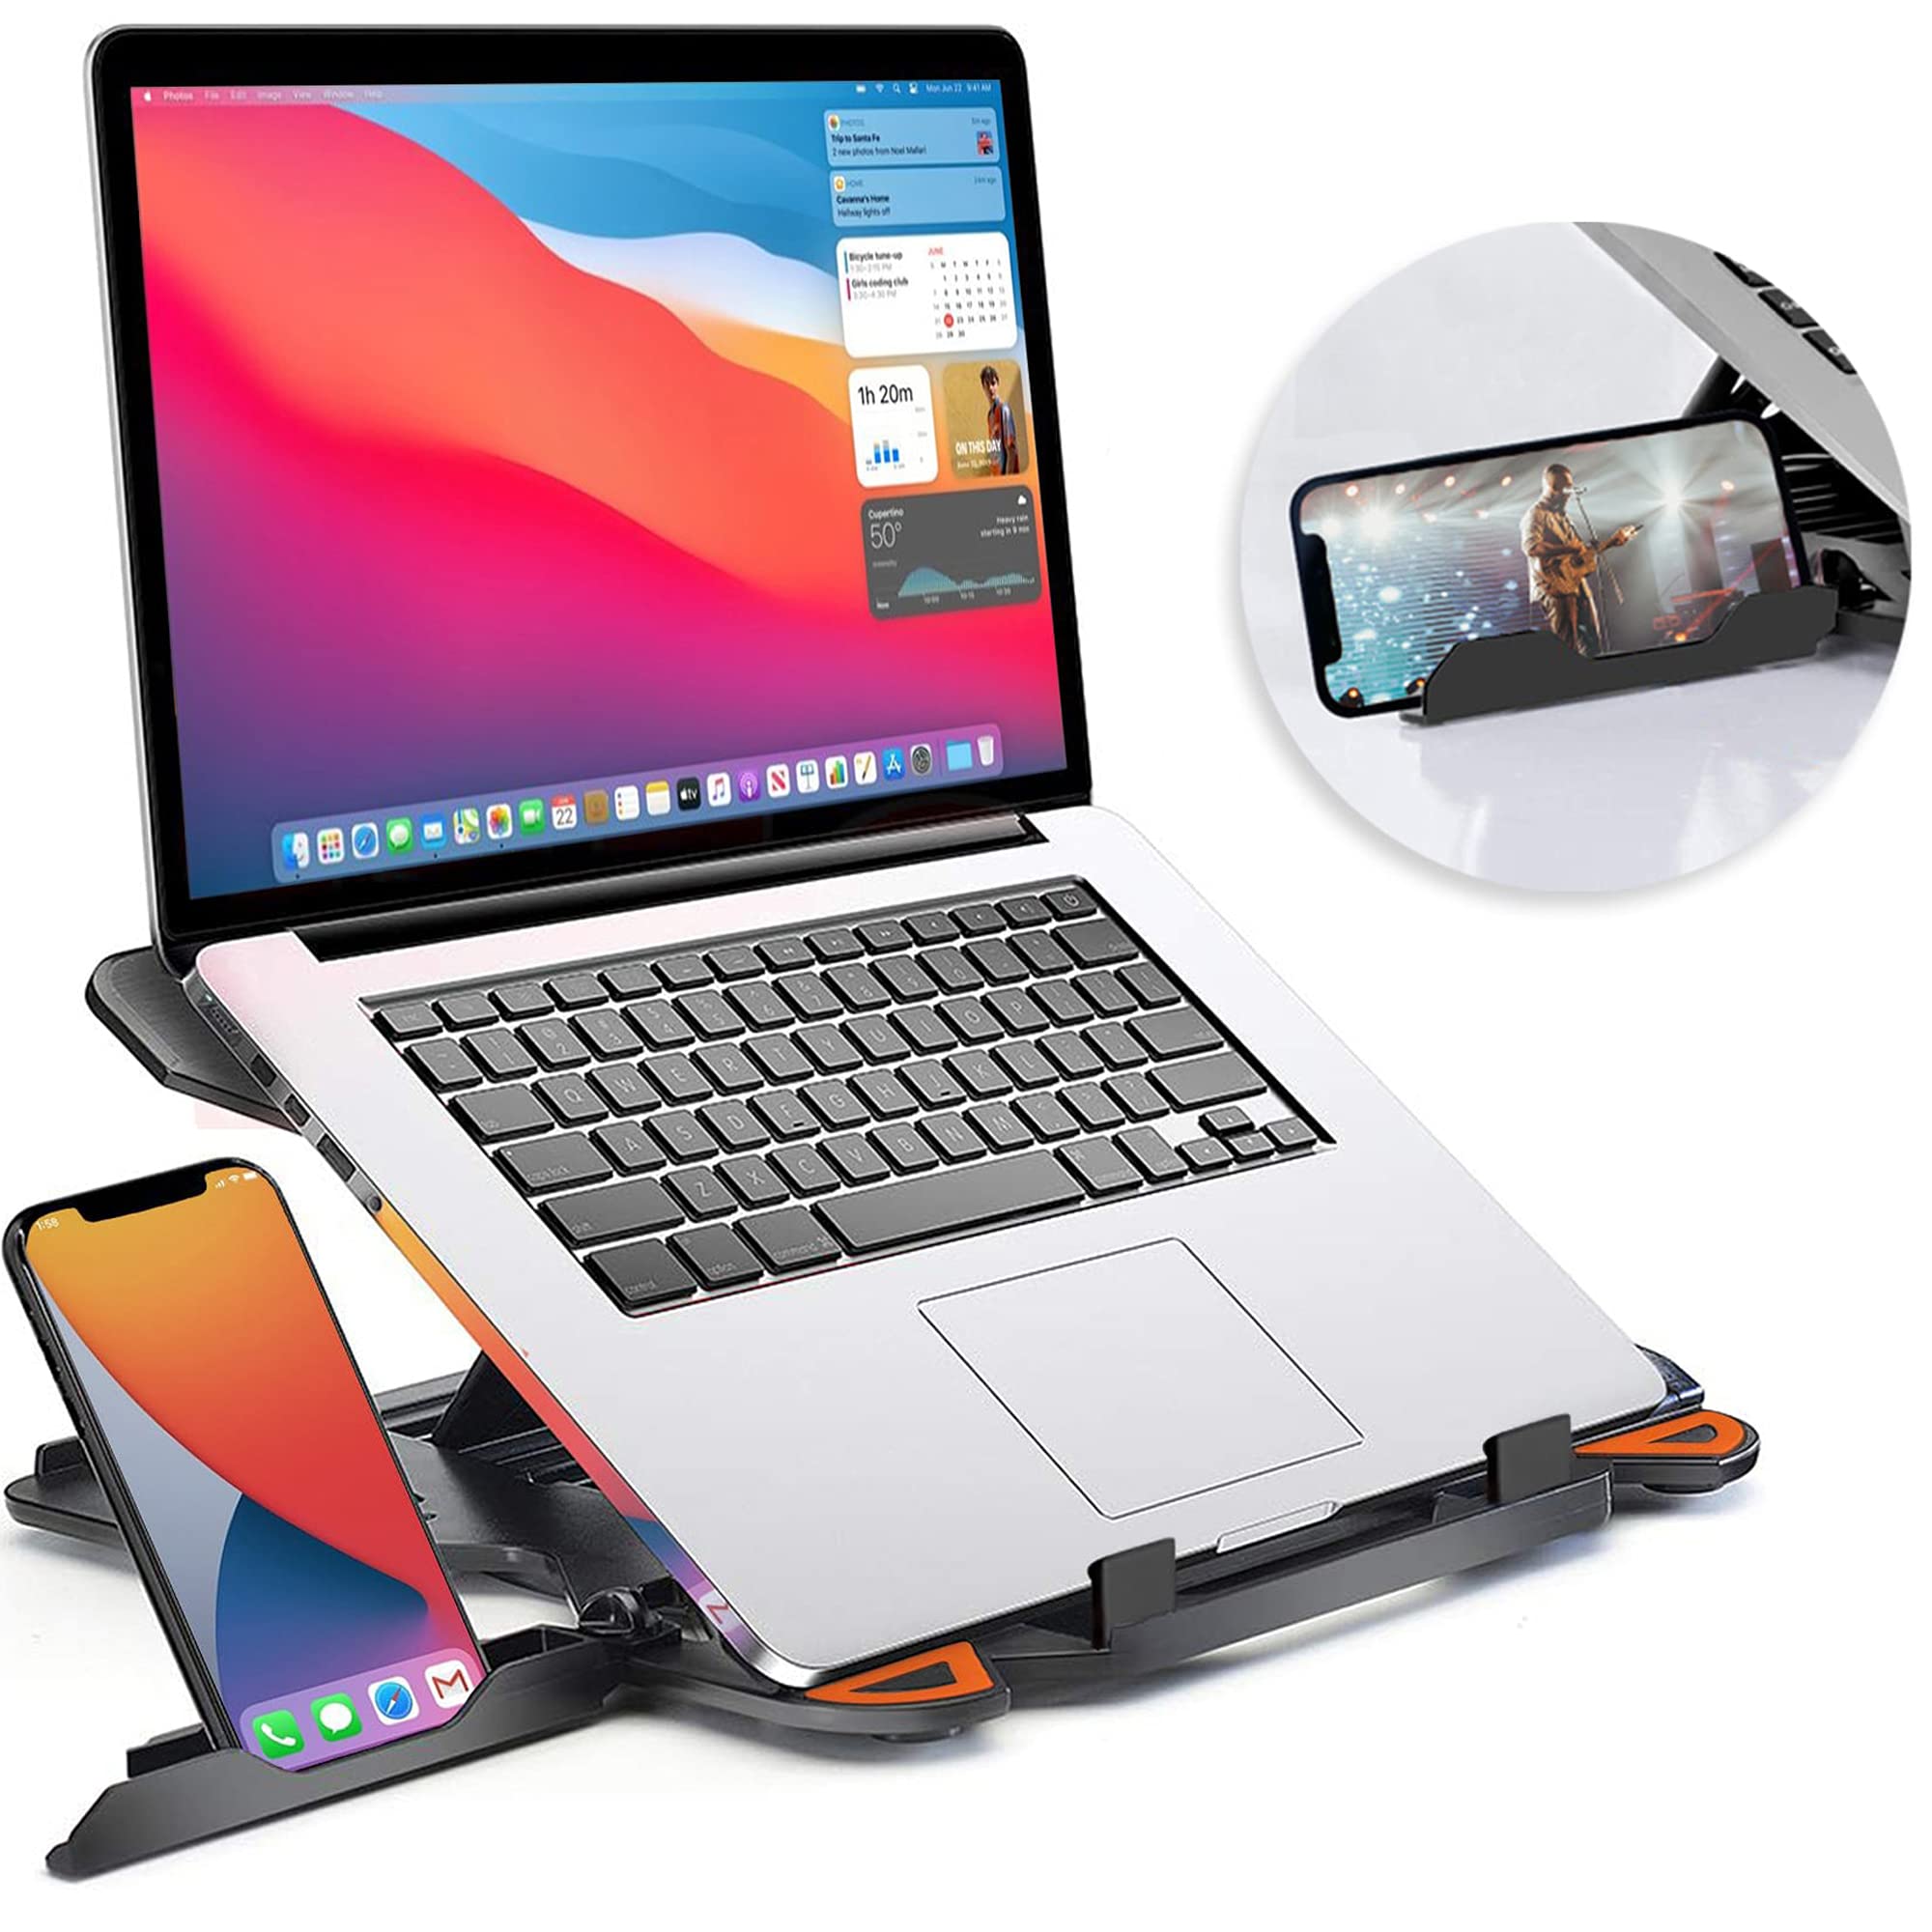 Apex Industries- Laptop Stand, With Phone Holder and 360°Adjustable, Laptop Stand For Desk, Laptop Riser for Desk, Portable Laptop Stand Compatible with All Laptops/MacBook Stand 13"15"17.